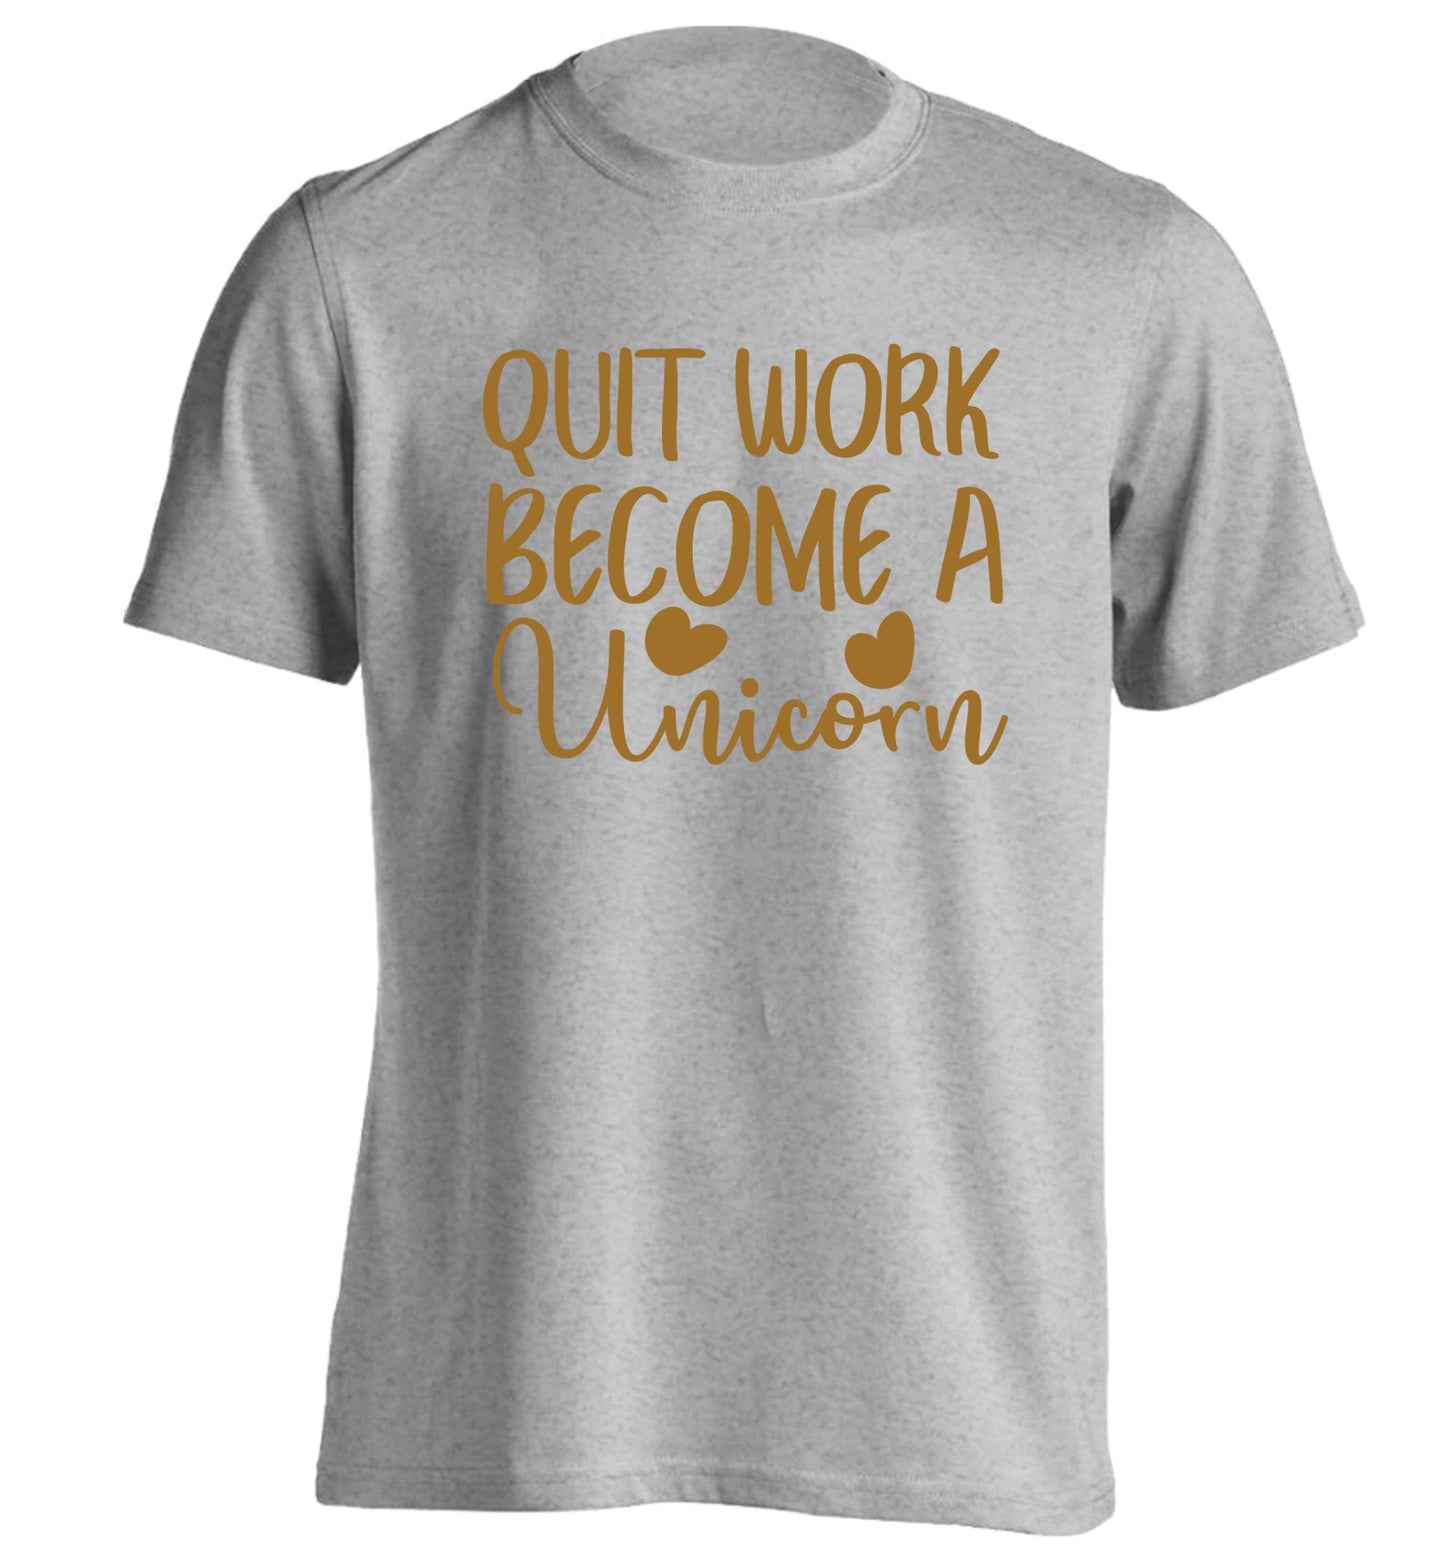 Quit work become a unicorn adults unisex grey Tshirt 2XL